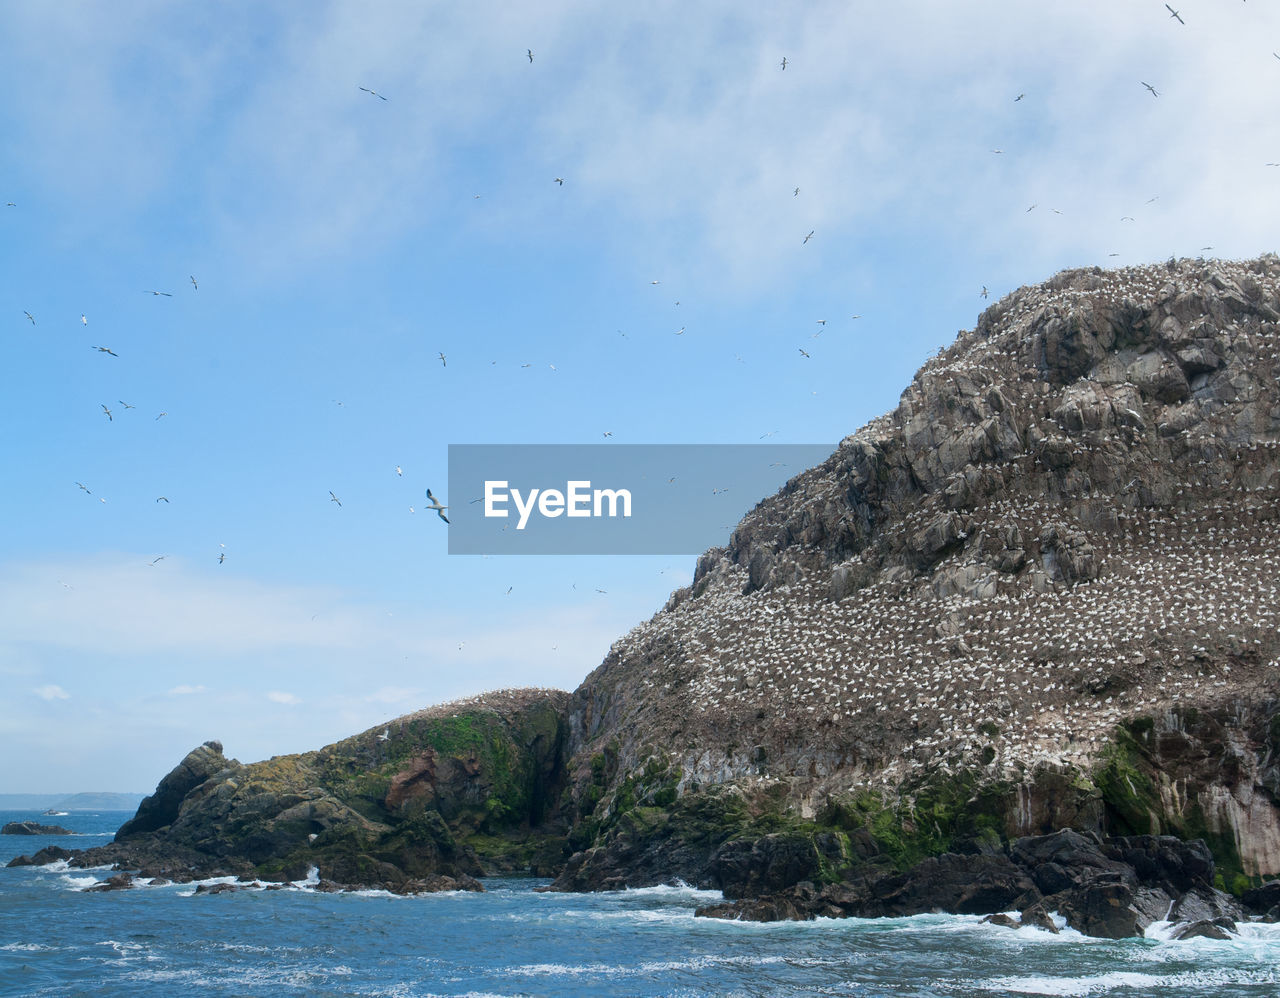 VIEW OF BIRDS ON ROCK